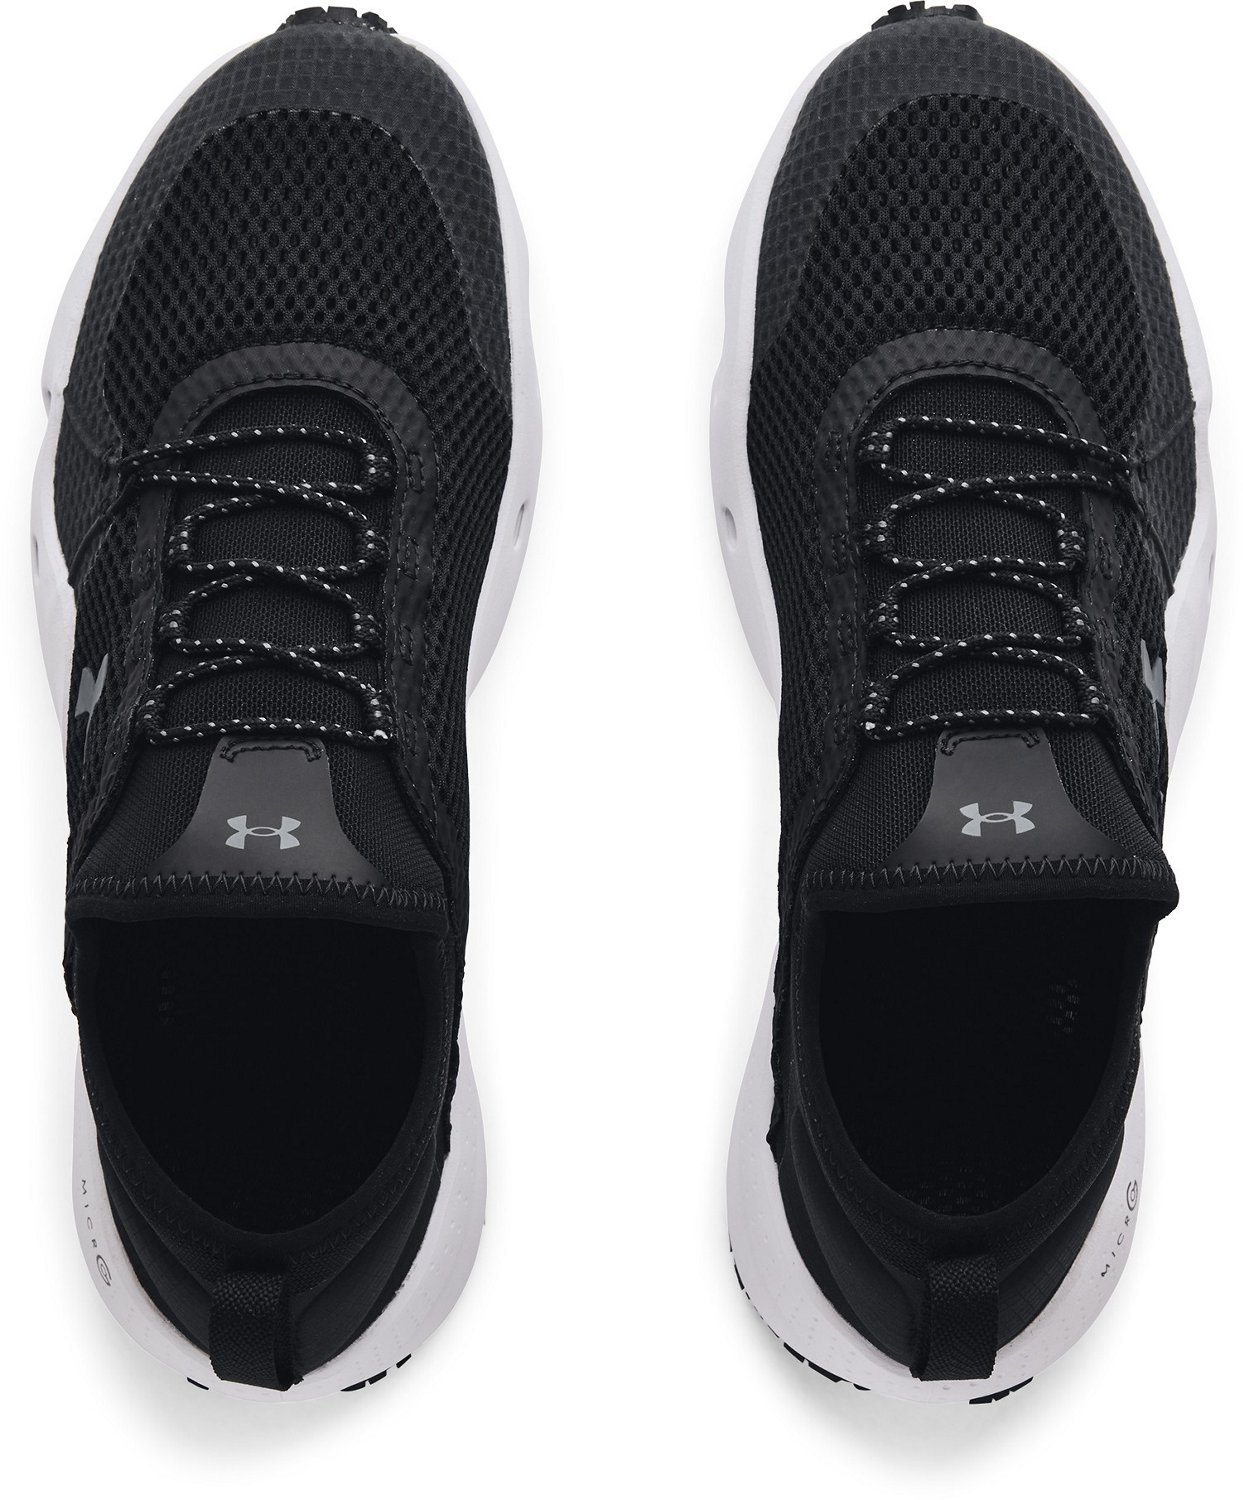 Under Armour Men's UA Micro G Kilchis Fishing Shoes | Academy